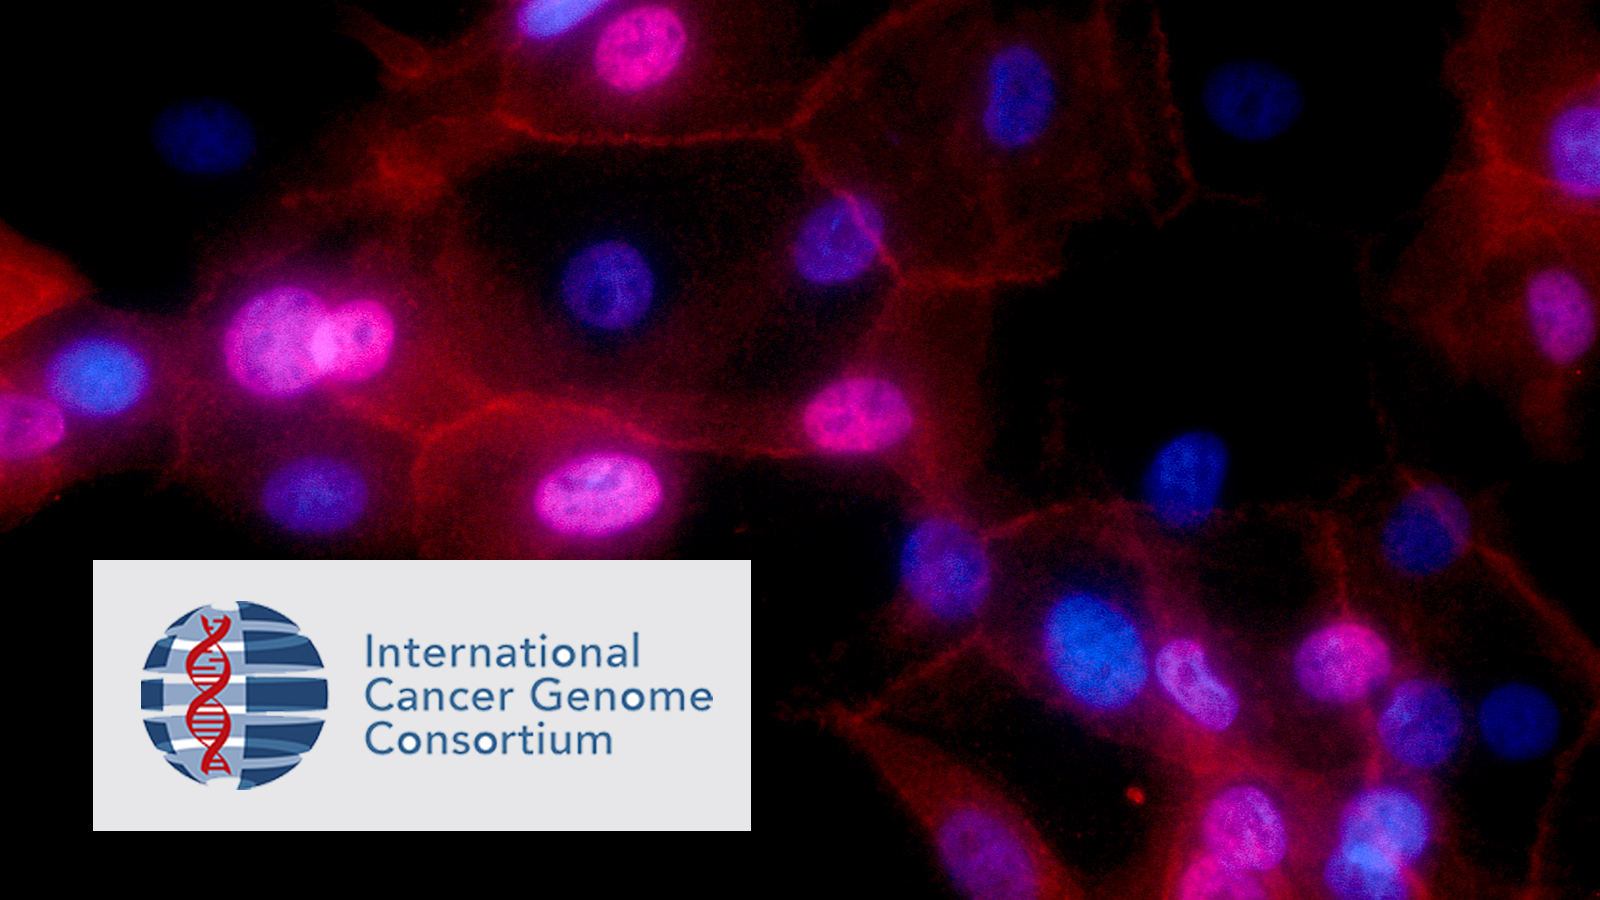 Microscope image of cancer cells with logo of International Cancer Genome Consortium